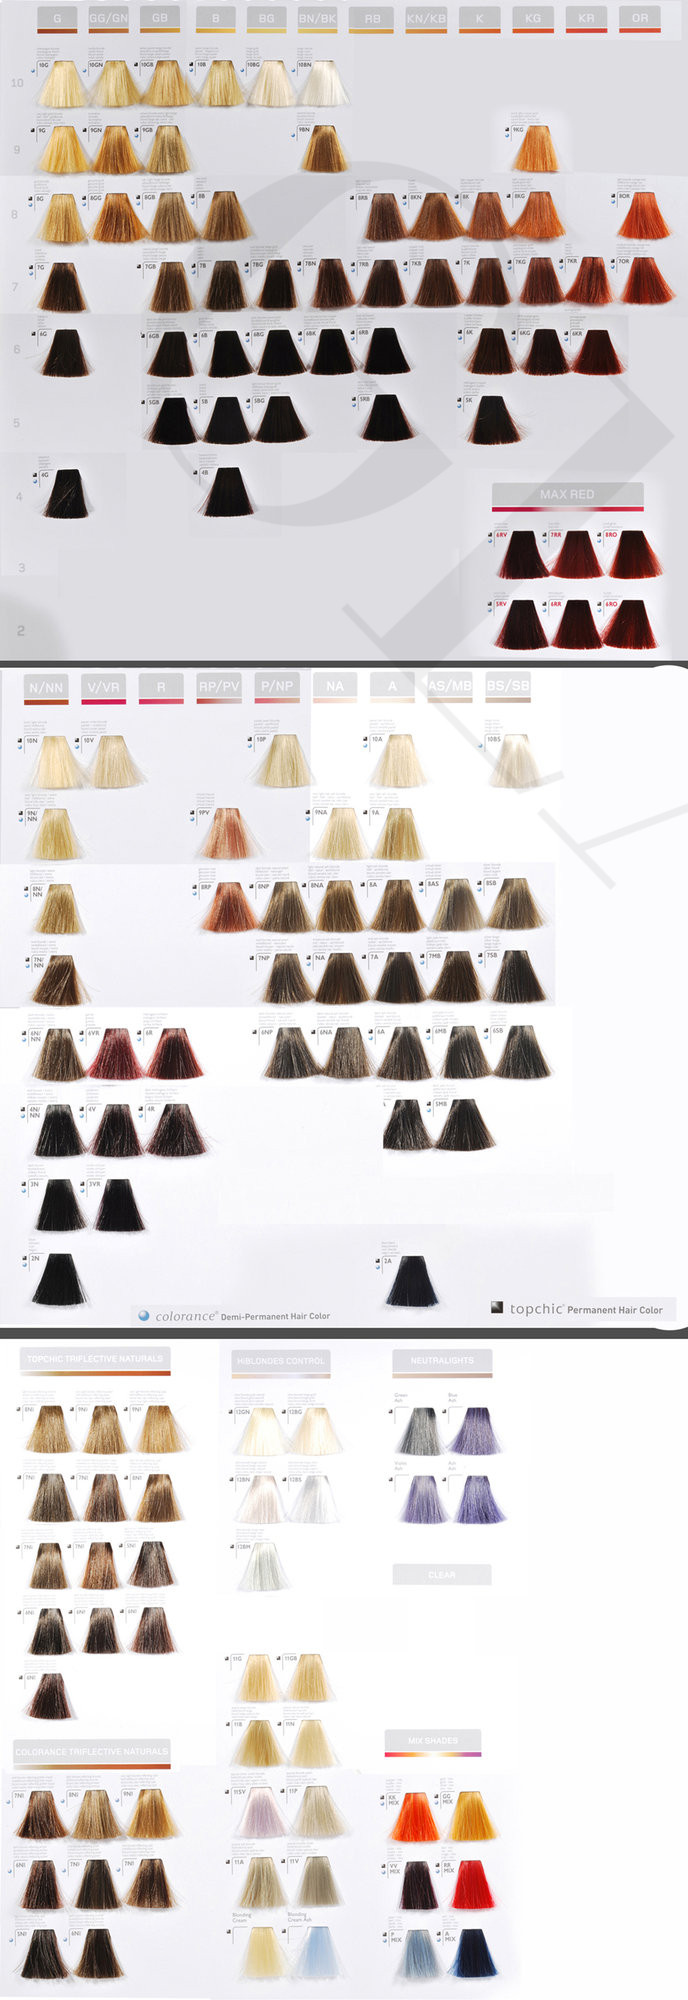 Goldwell Topchic Color Chart Shades My XXX Hot Girl